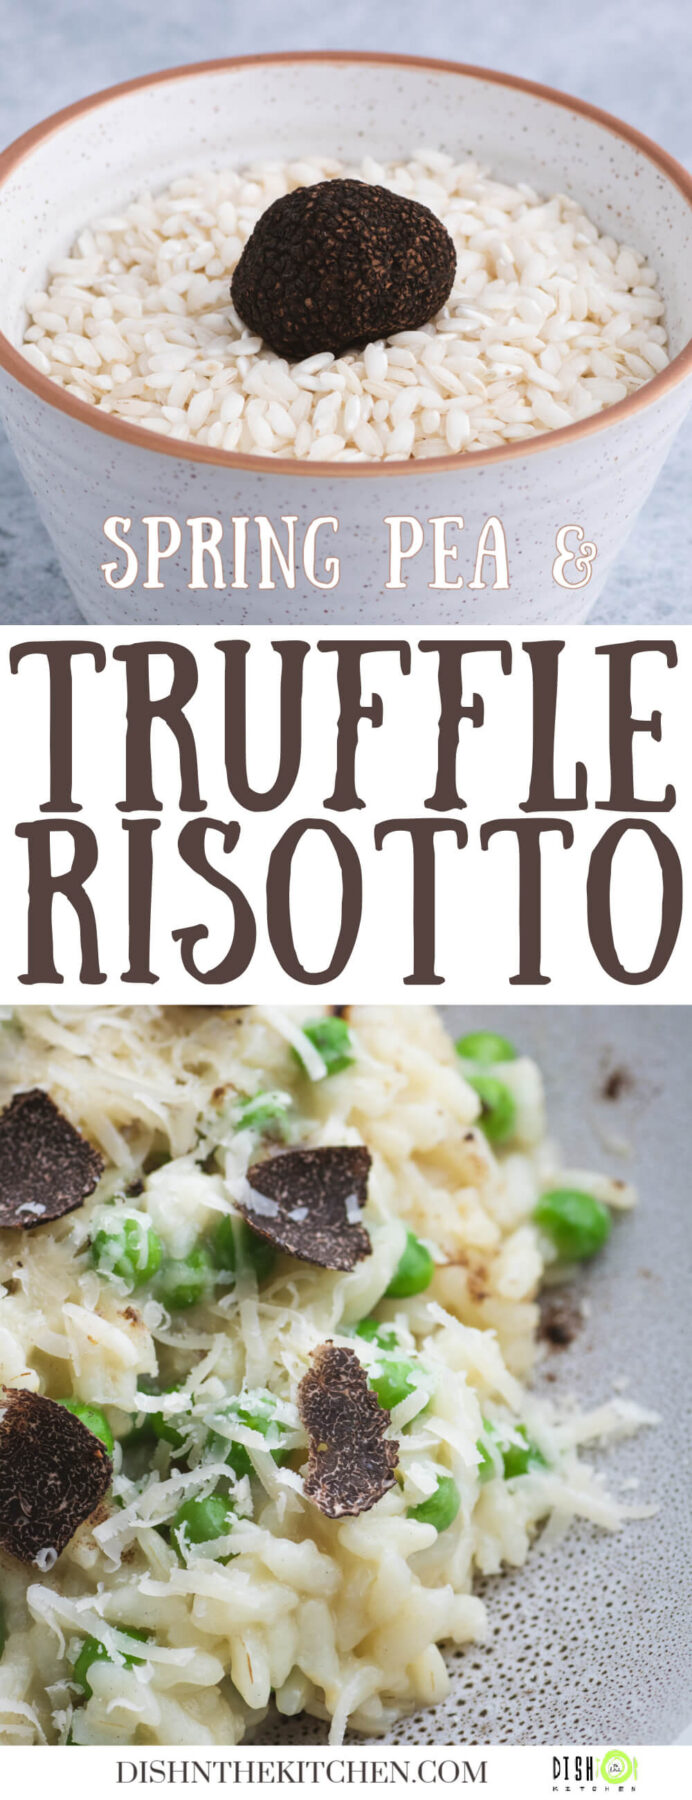 Pinterest image featuring a stone bowl containing creamy truffle risotto studded with green peas and sliced winter truffle.